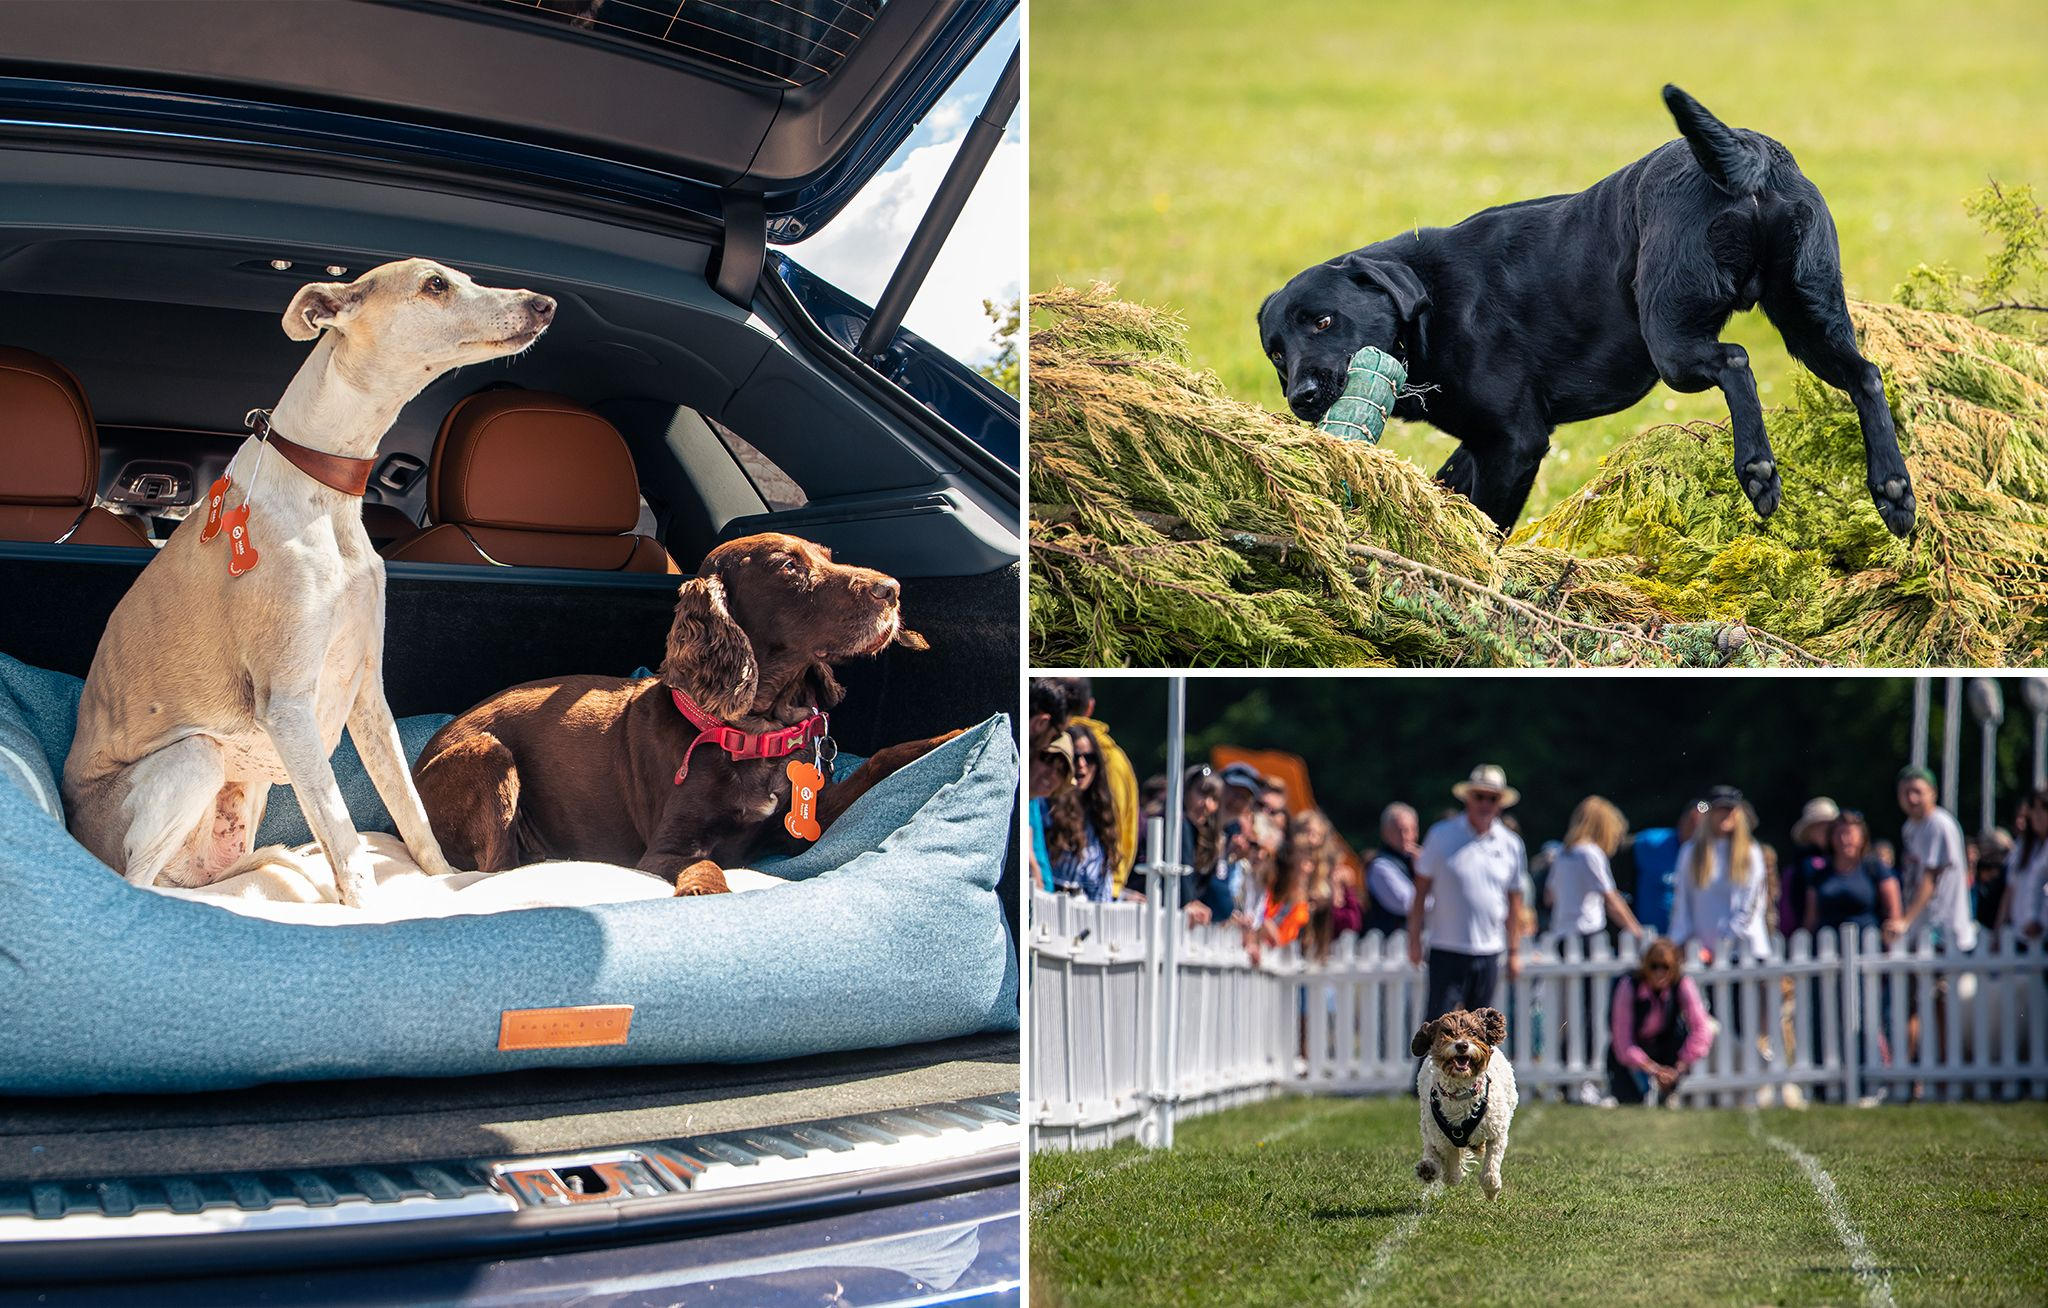 cChic Magazine Suisse - Bentley raises the Woof - at Goodwood’s festival for dogs